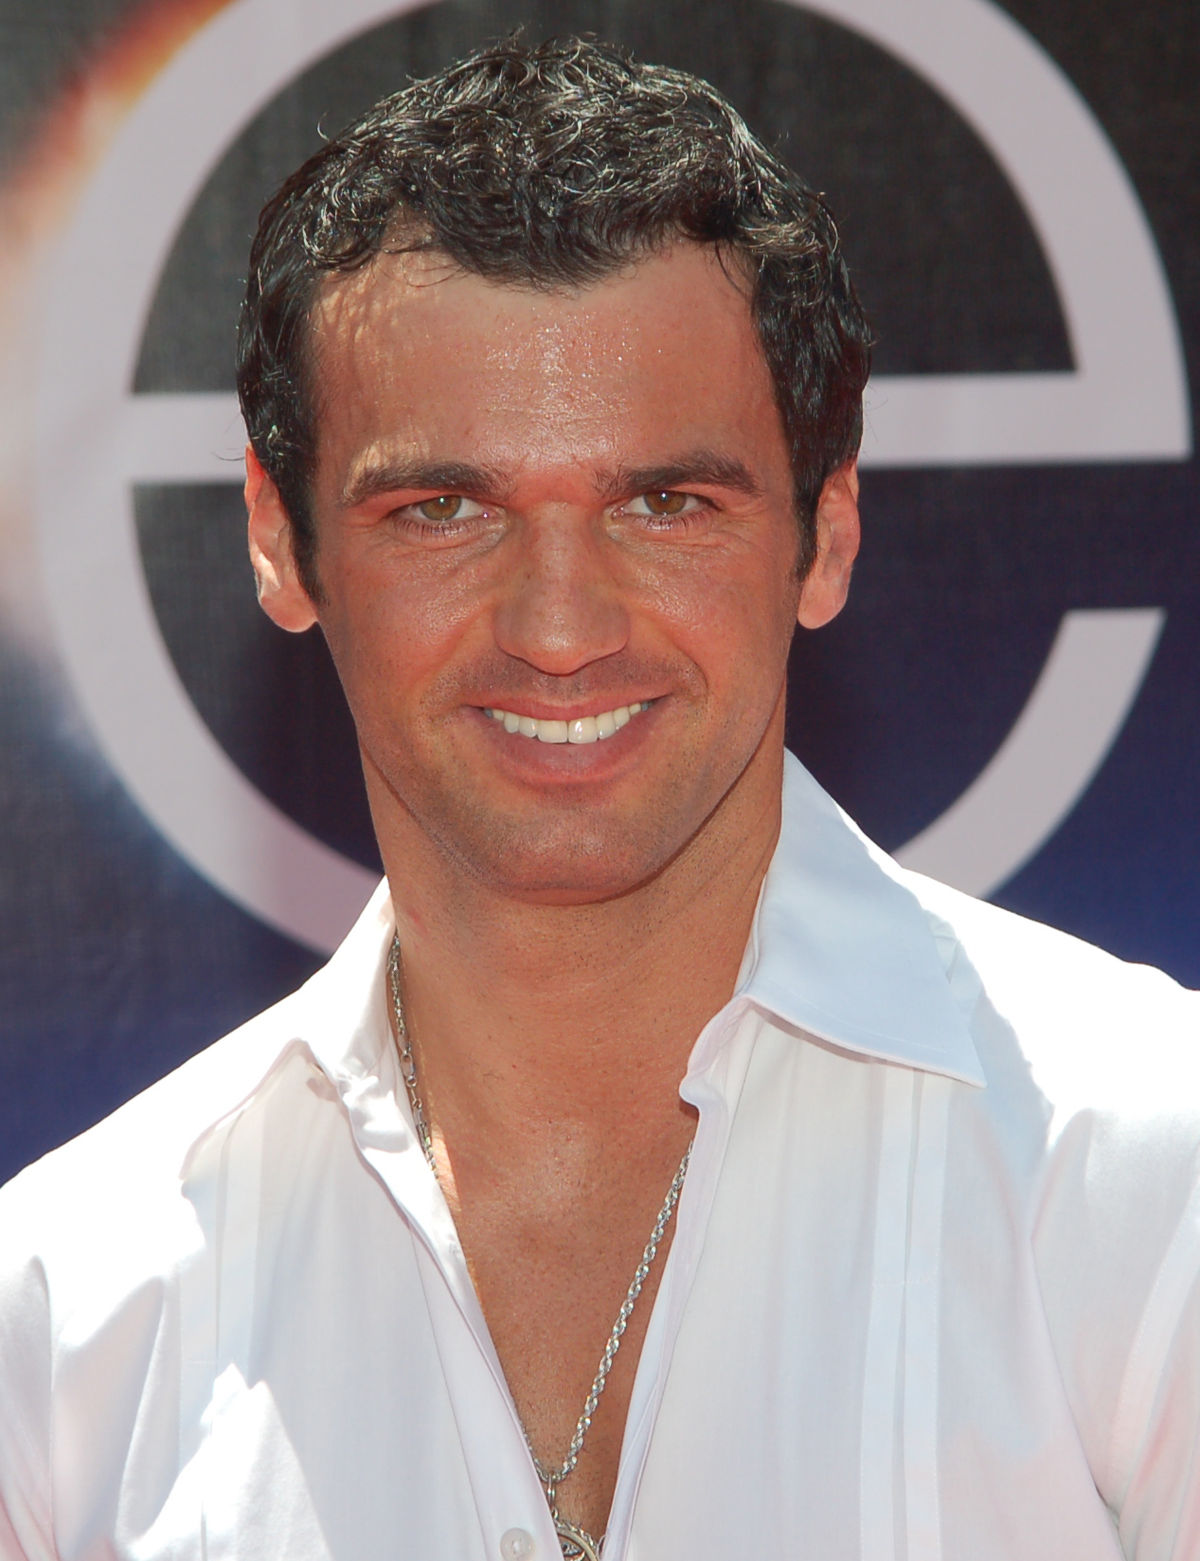 Dancing with the Stars’ Tony Dovolani begins Vegas Chippendales stint